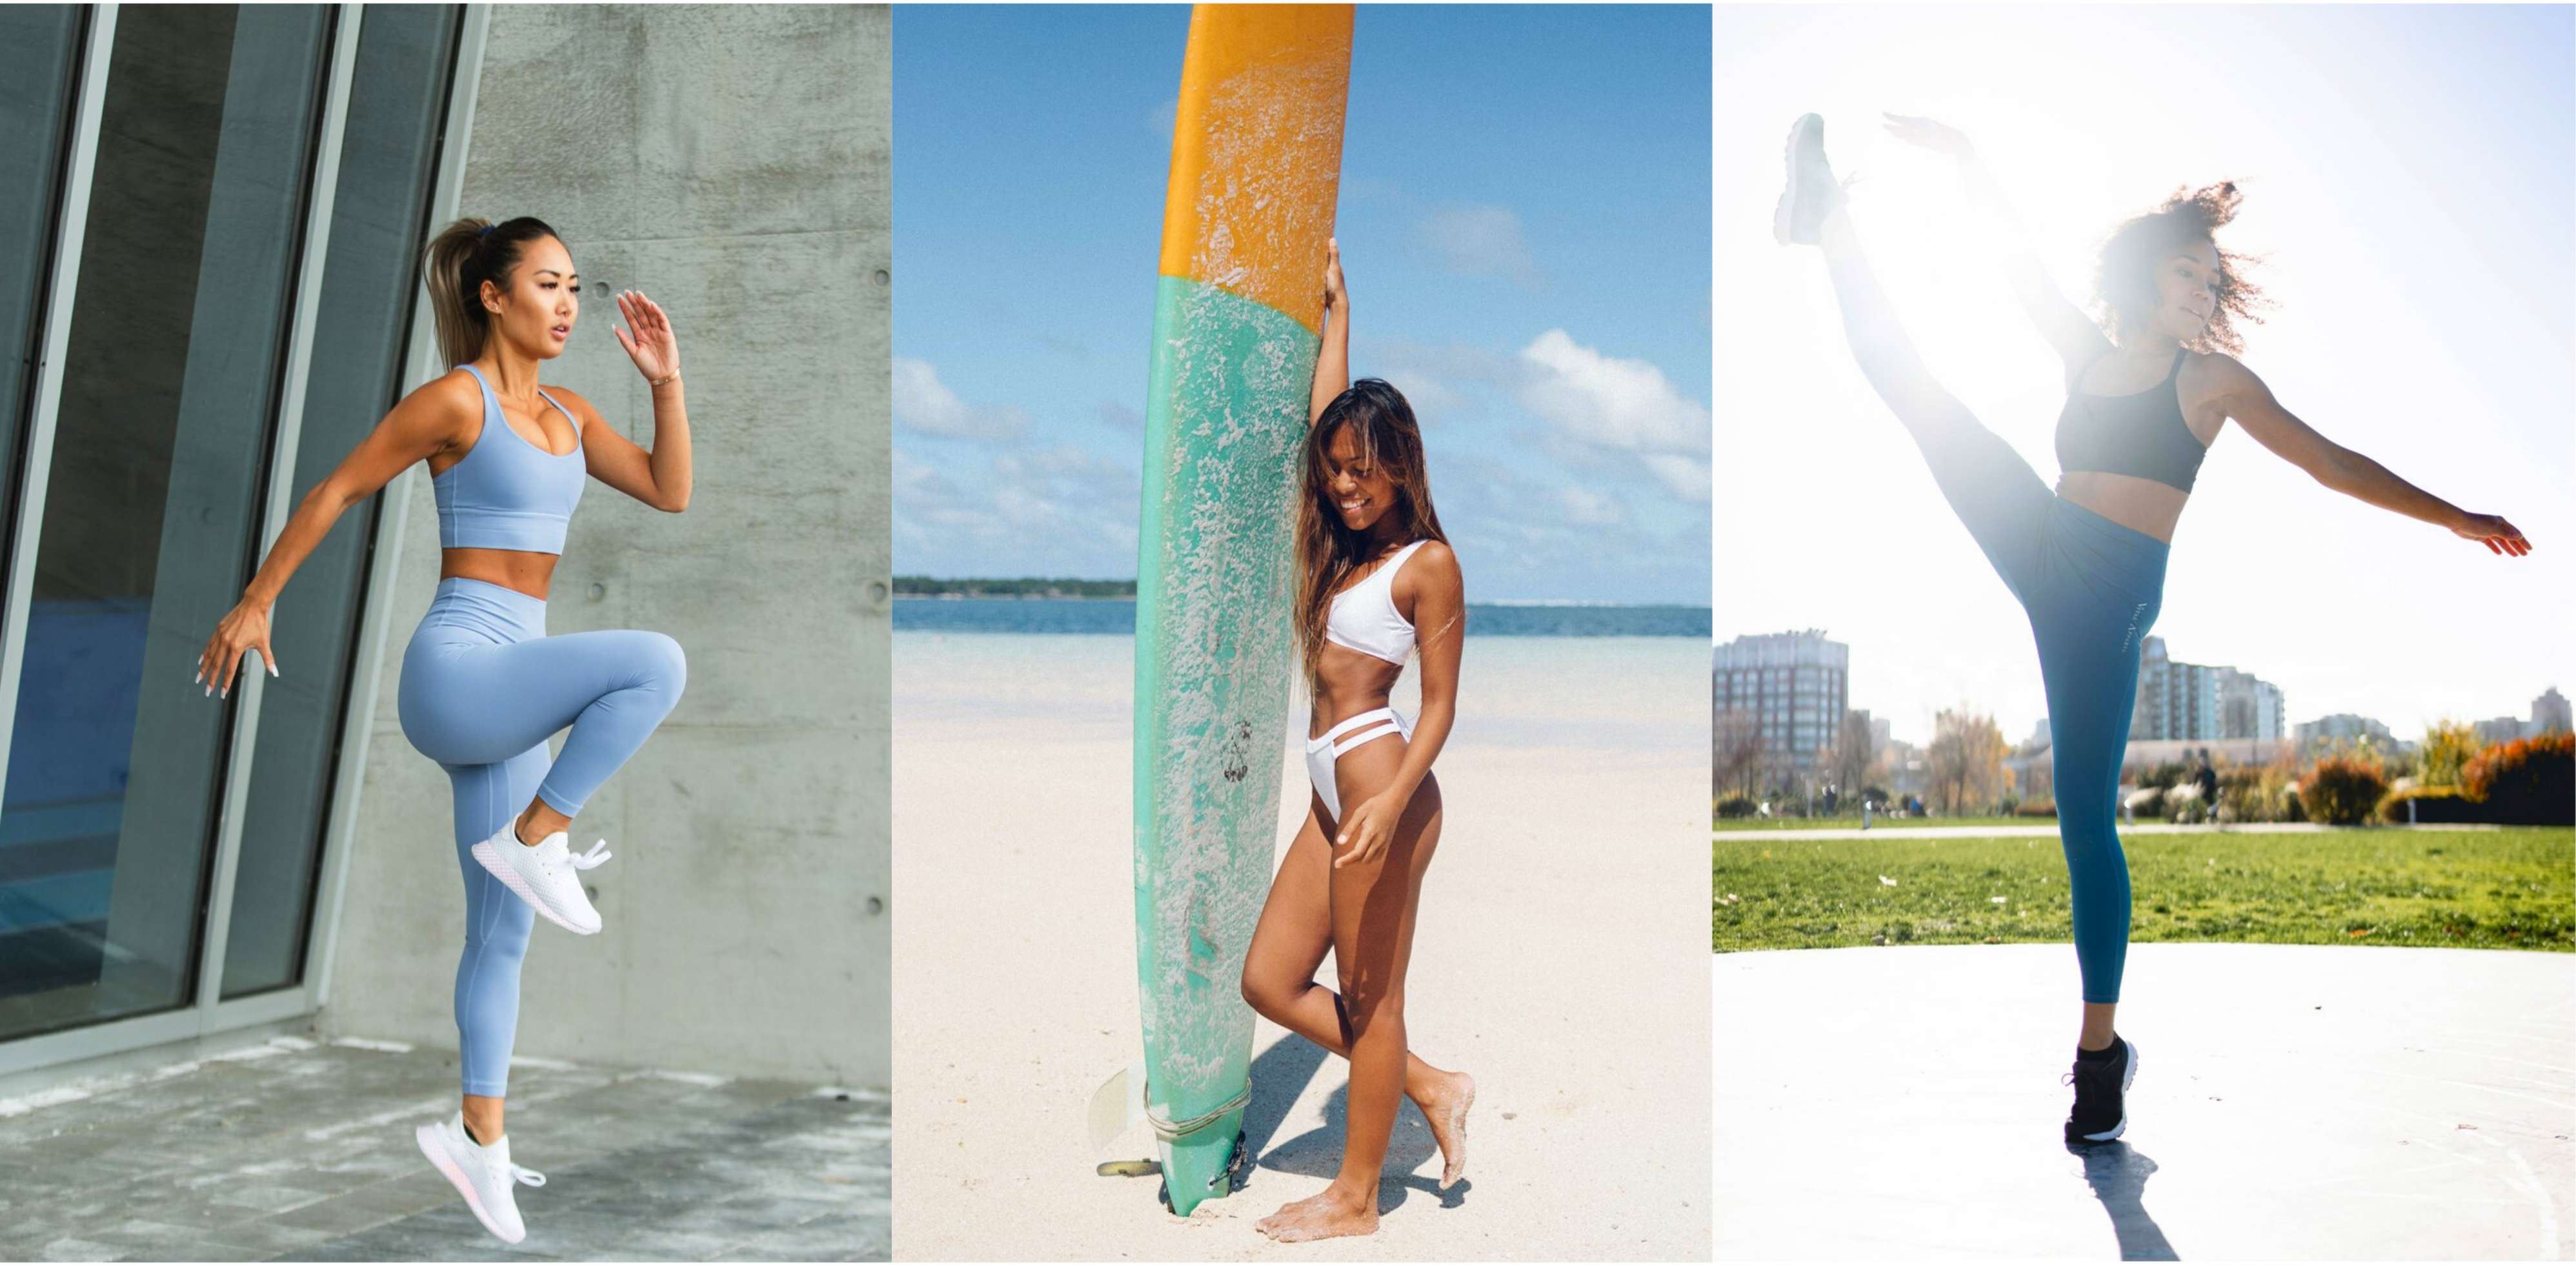 Vitae Apparel makes sustainable fitness apparel & swimwear for